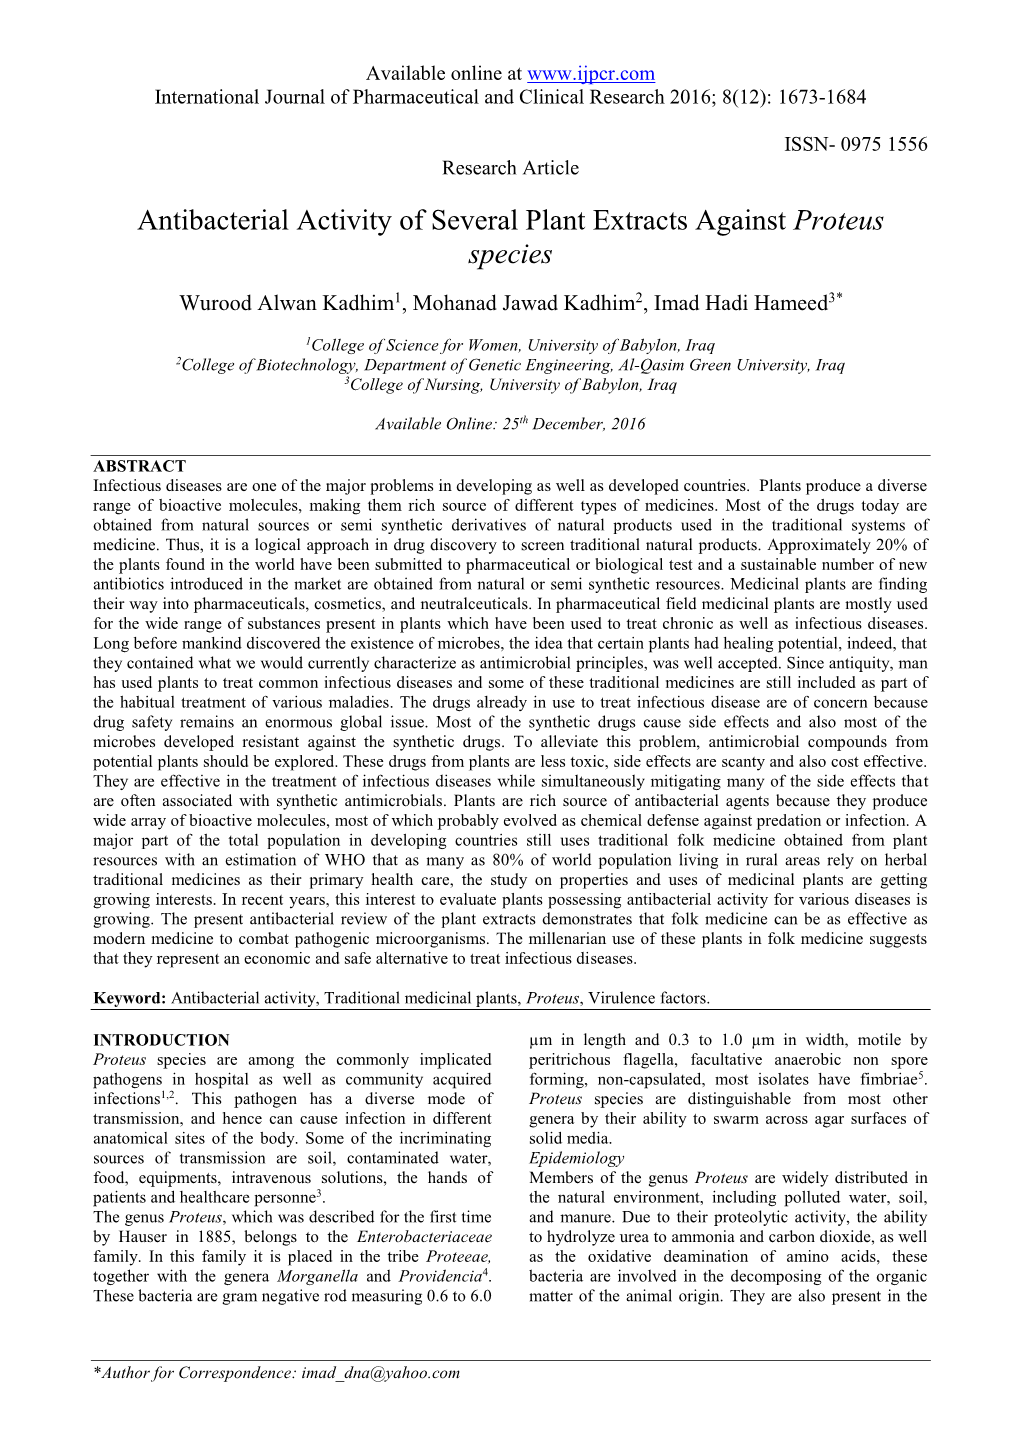 Antibacterial Activity of Several Plant Extracts Against Proteus Species